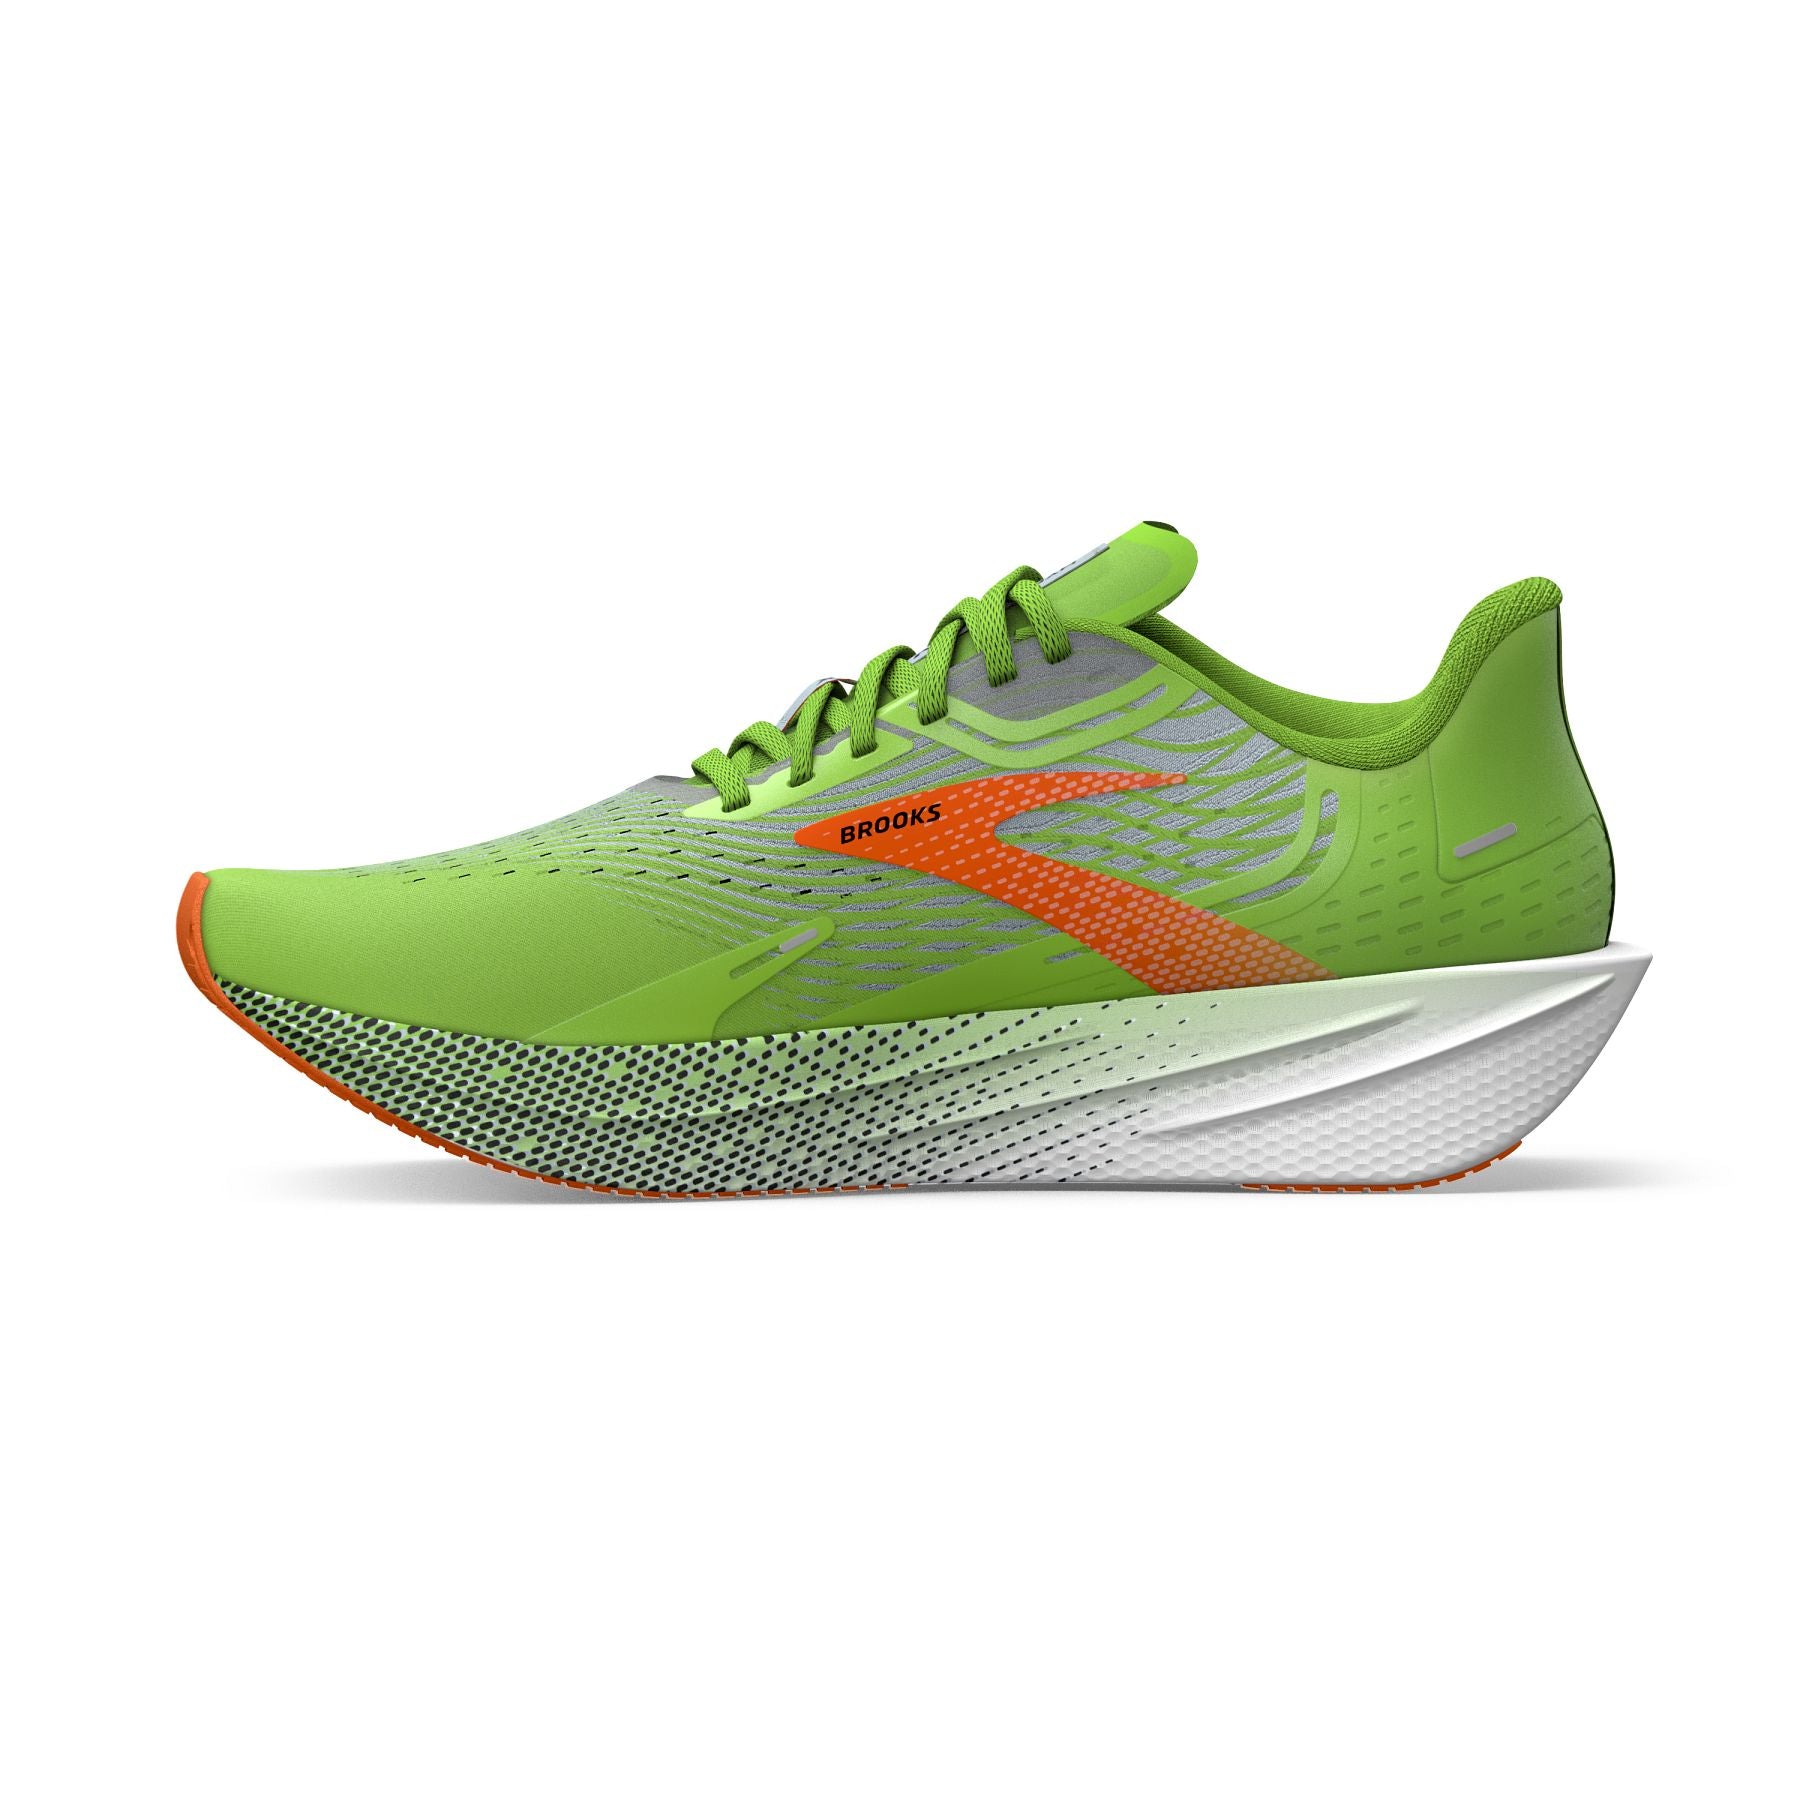 Medial view of the Men's Hyperion Max in Green Gecko/Red Orange/White